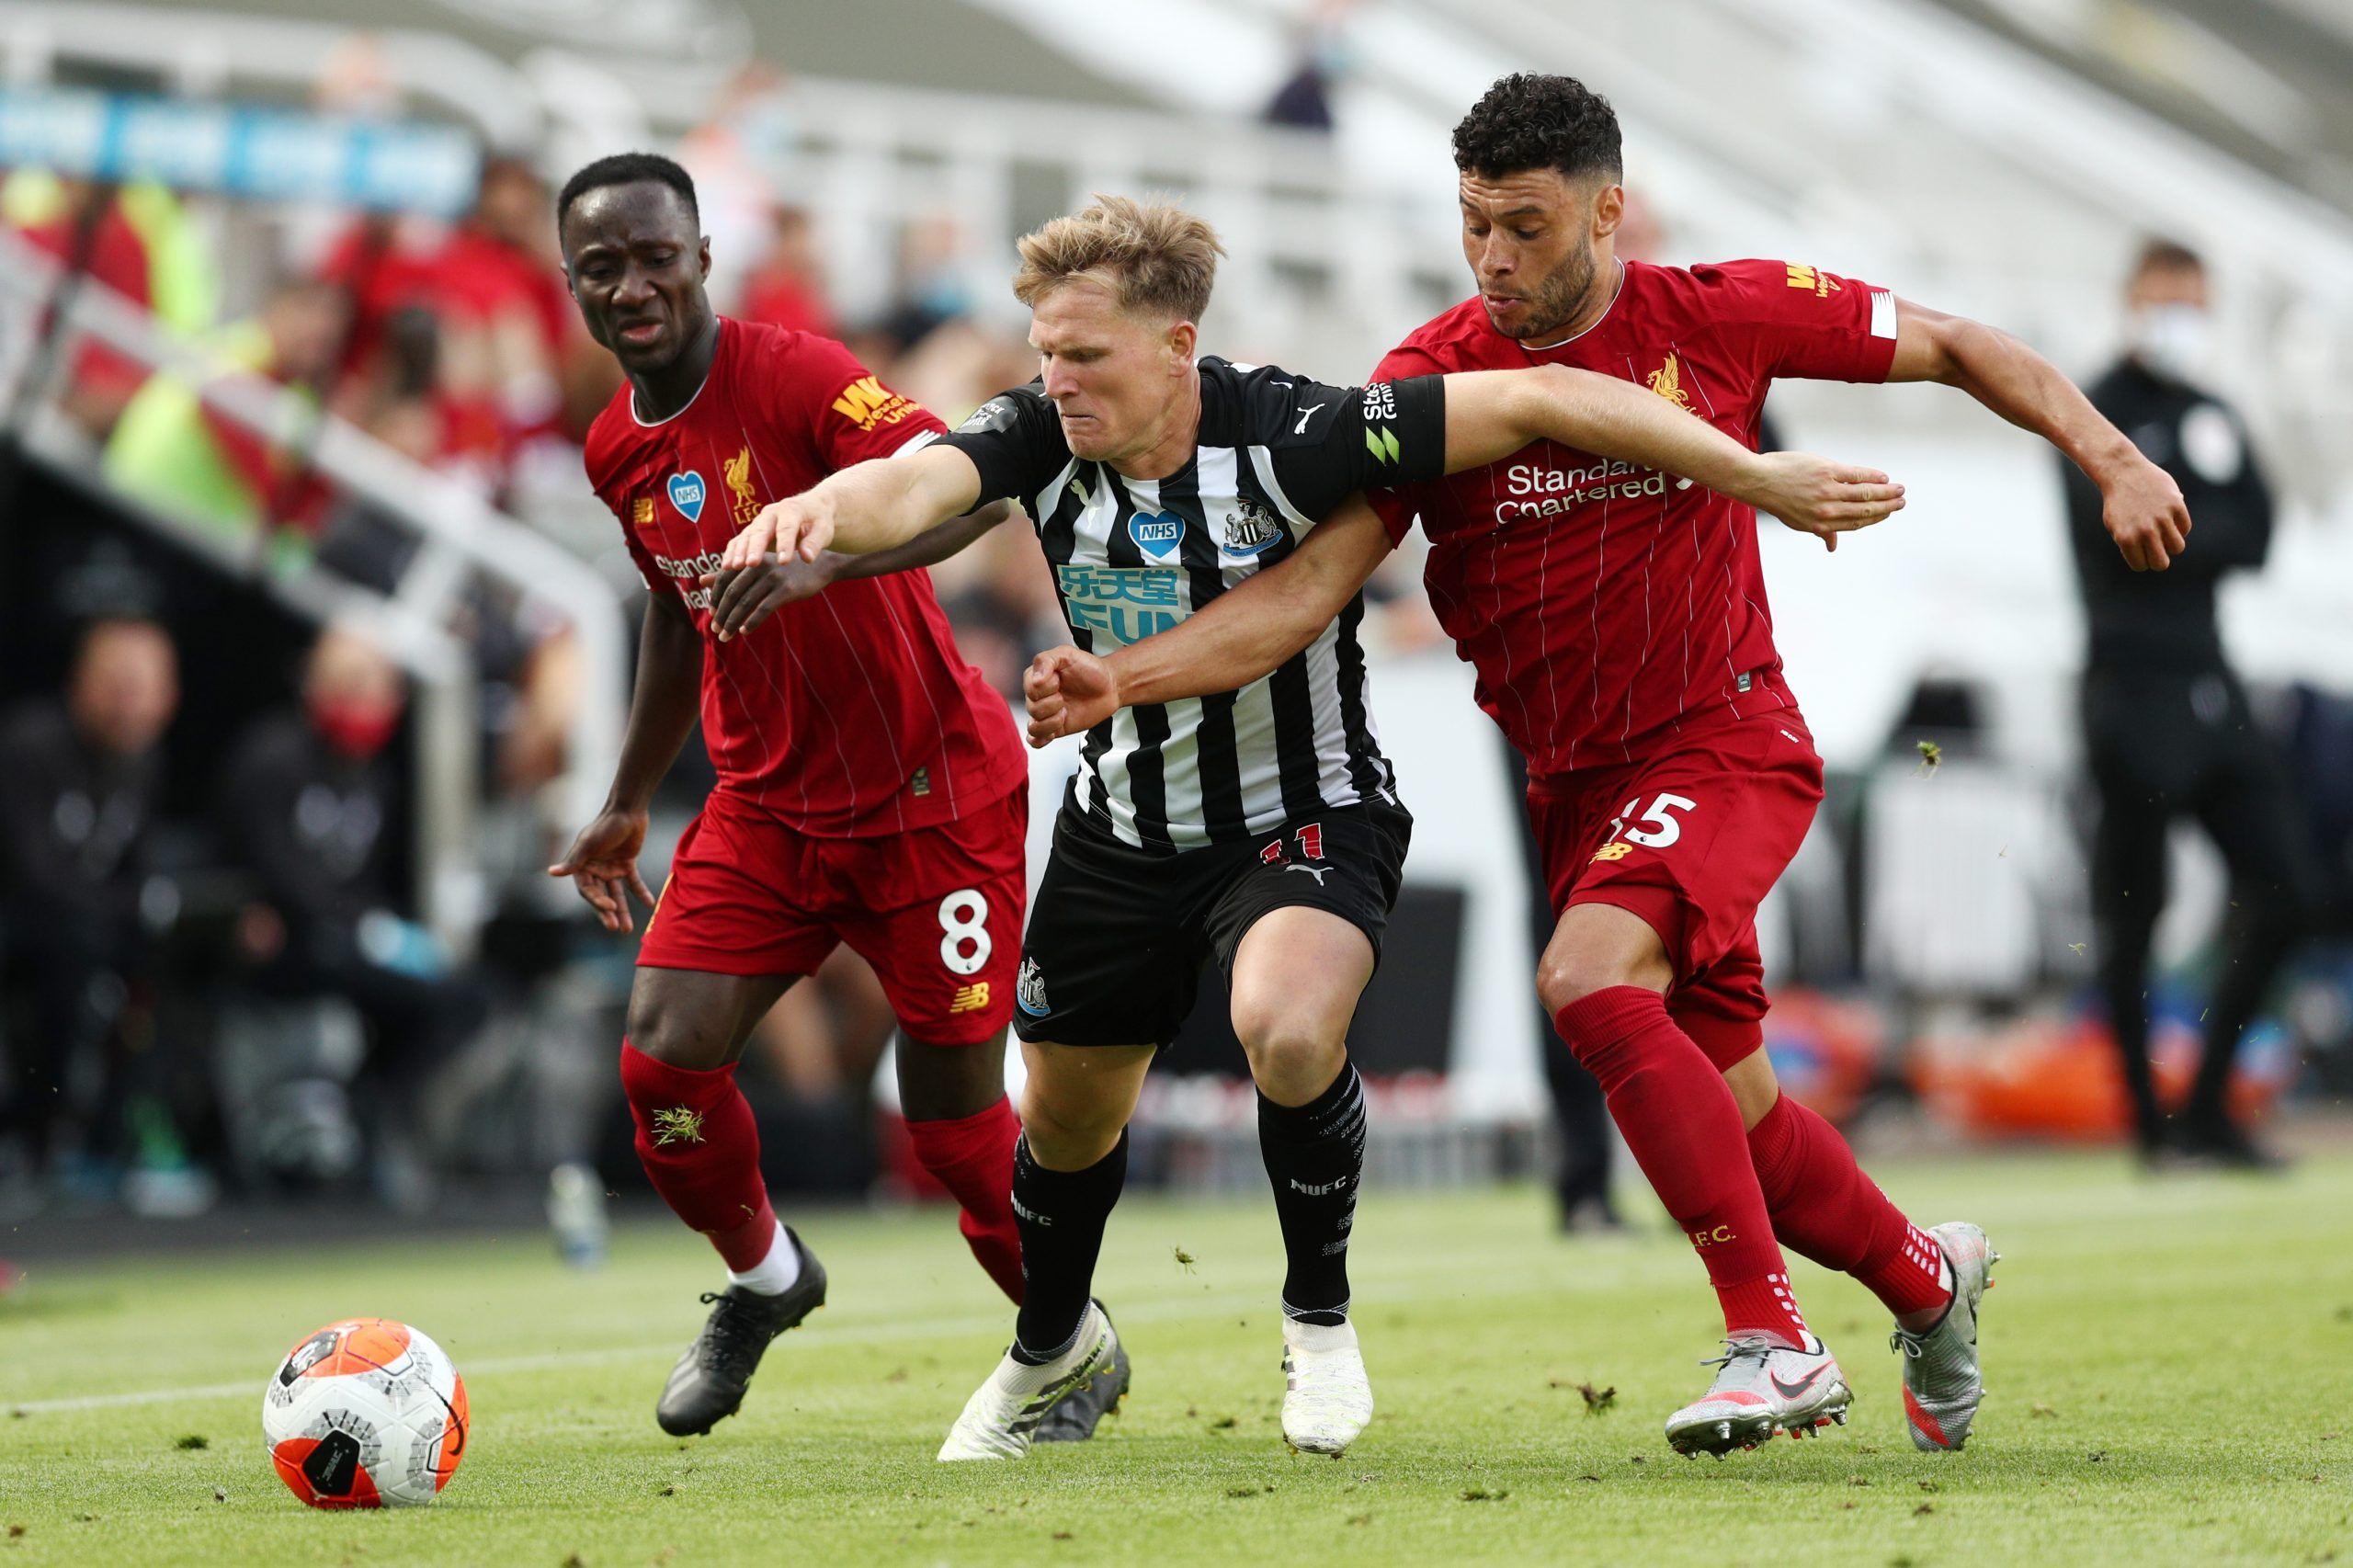 Soccer Football - Premier League - Newcastle United v Liverpool - St James' Park, Newcastle, Britain - July 26, 2020  Newcastle United's Matt Ritchie in action with Liverpool's Alex Oxlade-Chamberlain and Naby Keita, as play resumes behind closed doors following the outbreak of the coronavirus disease (COVID-19) Pool via REUTERS/Jan Kruger EDITORIAL USE ONLY. No use with unauthorized audio, video, data, fixture lists, club/league logos or 'live' services. Online in-match use limited to 75 images